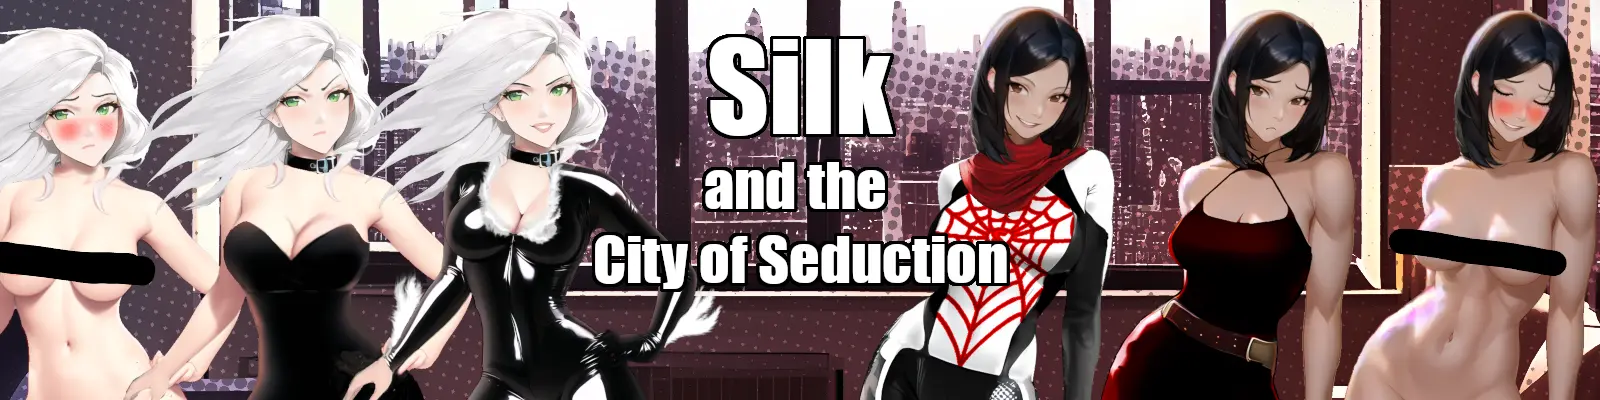 Silk and the City of Seduction main image